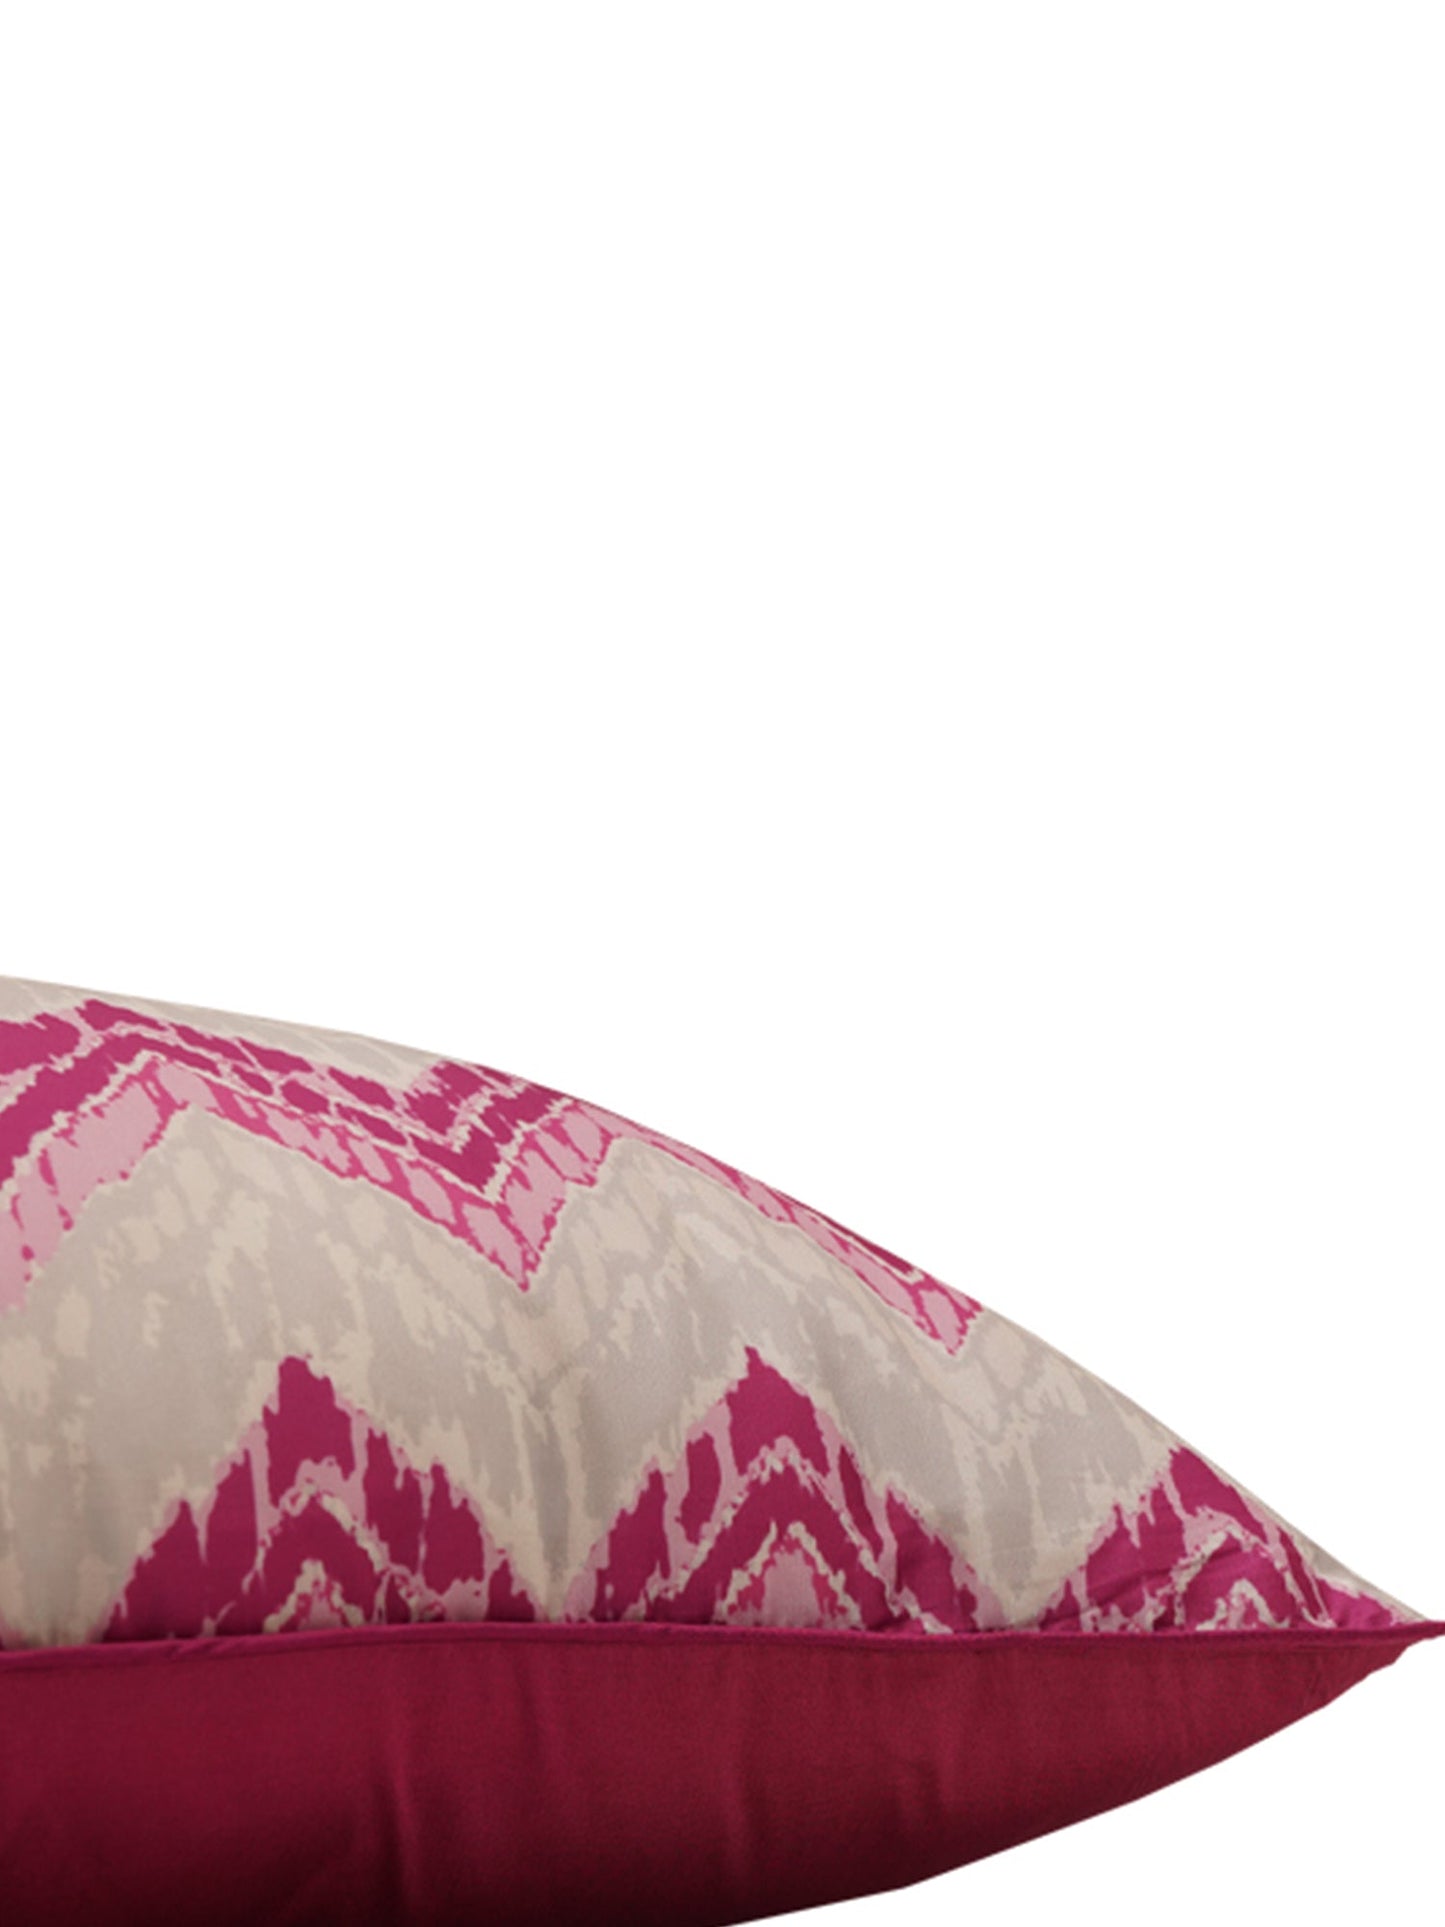 Cushion Cover Polyester Ikat  Pink - 20" X 20"